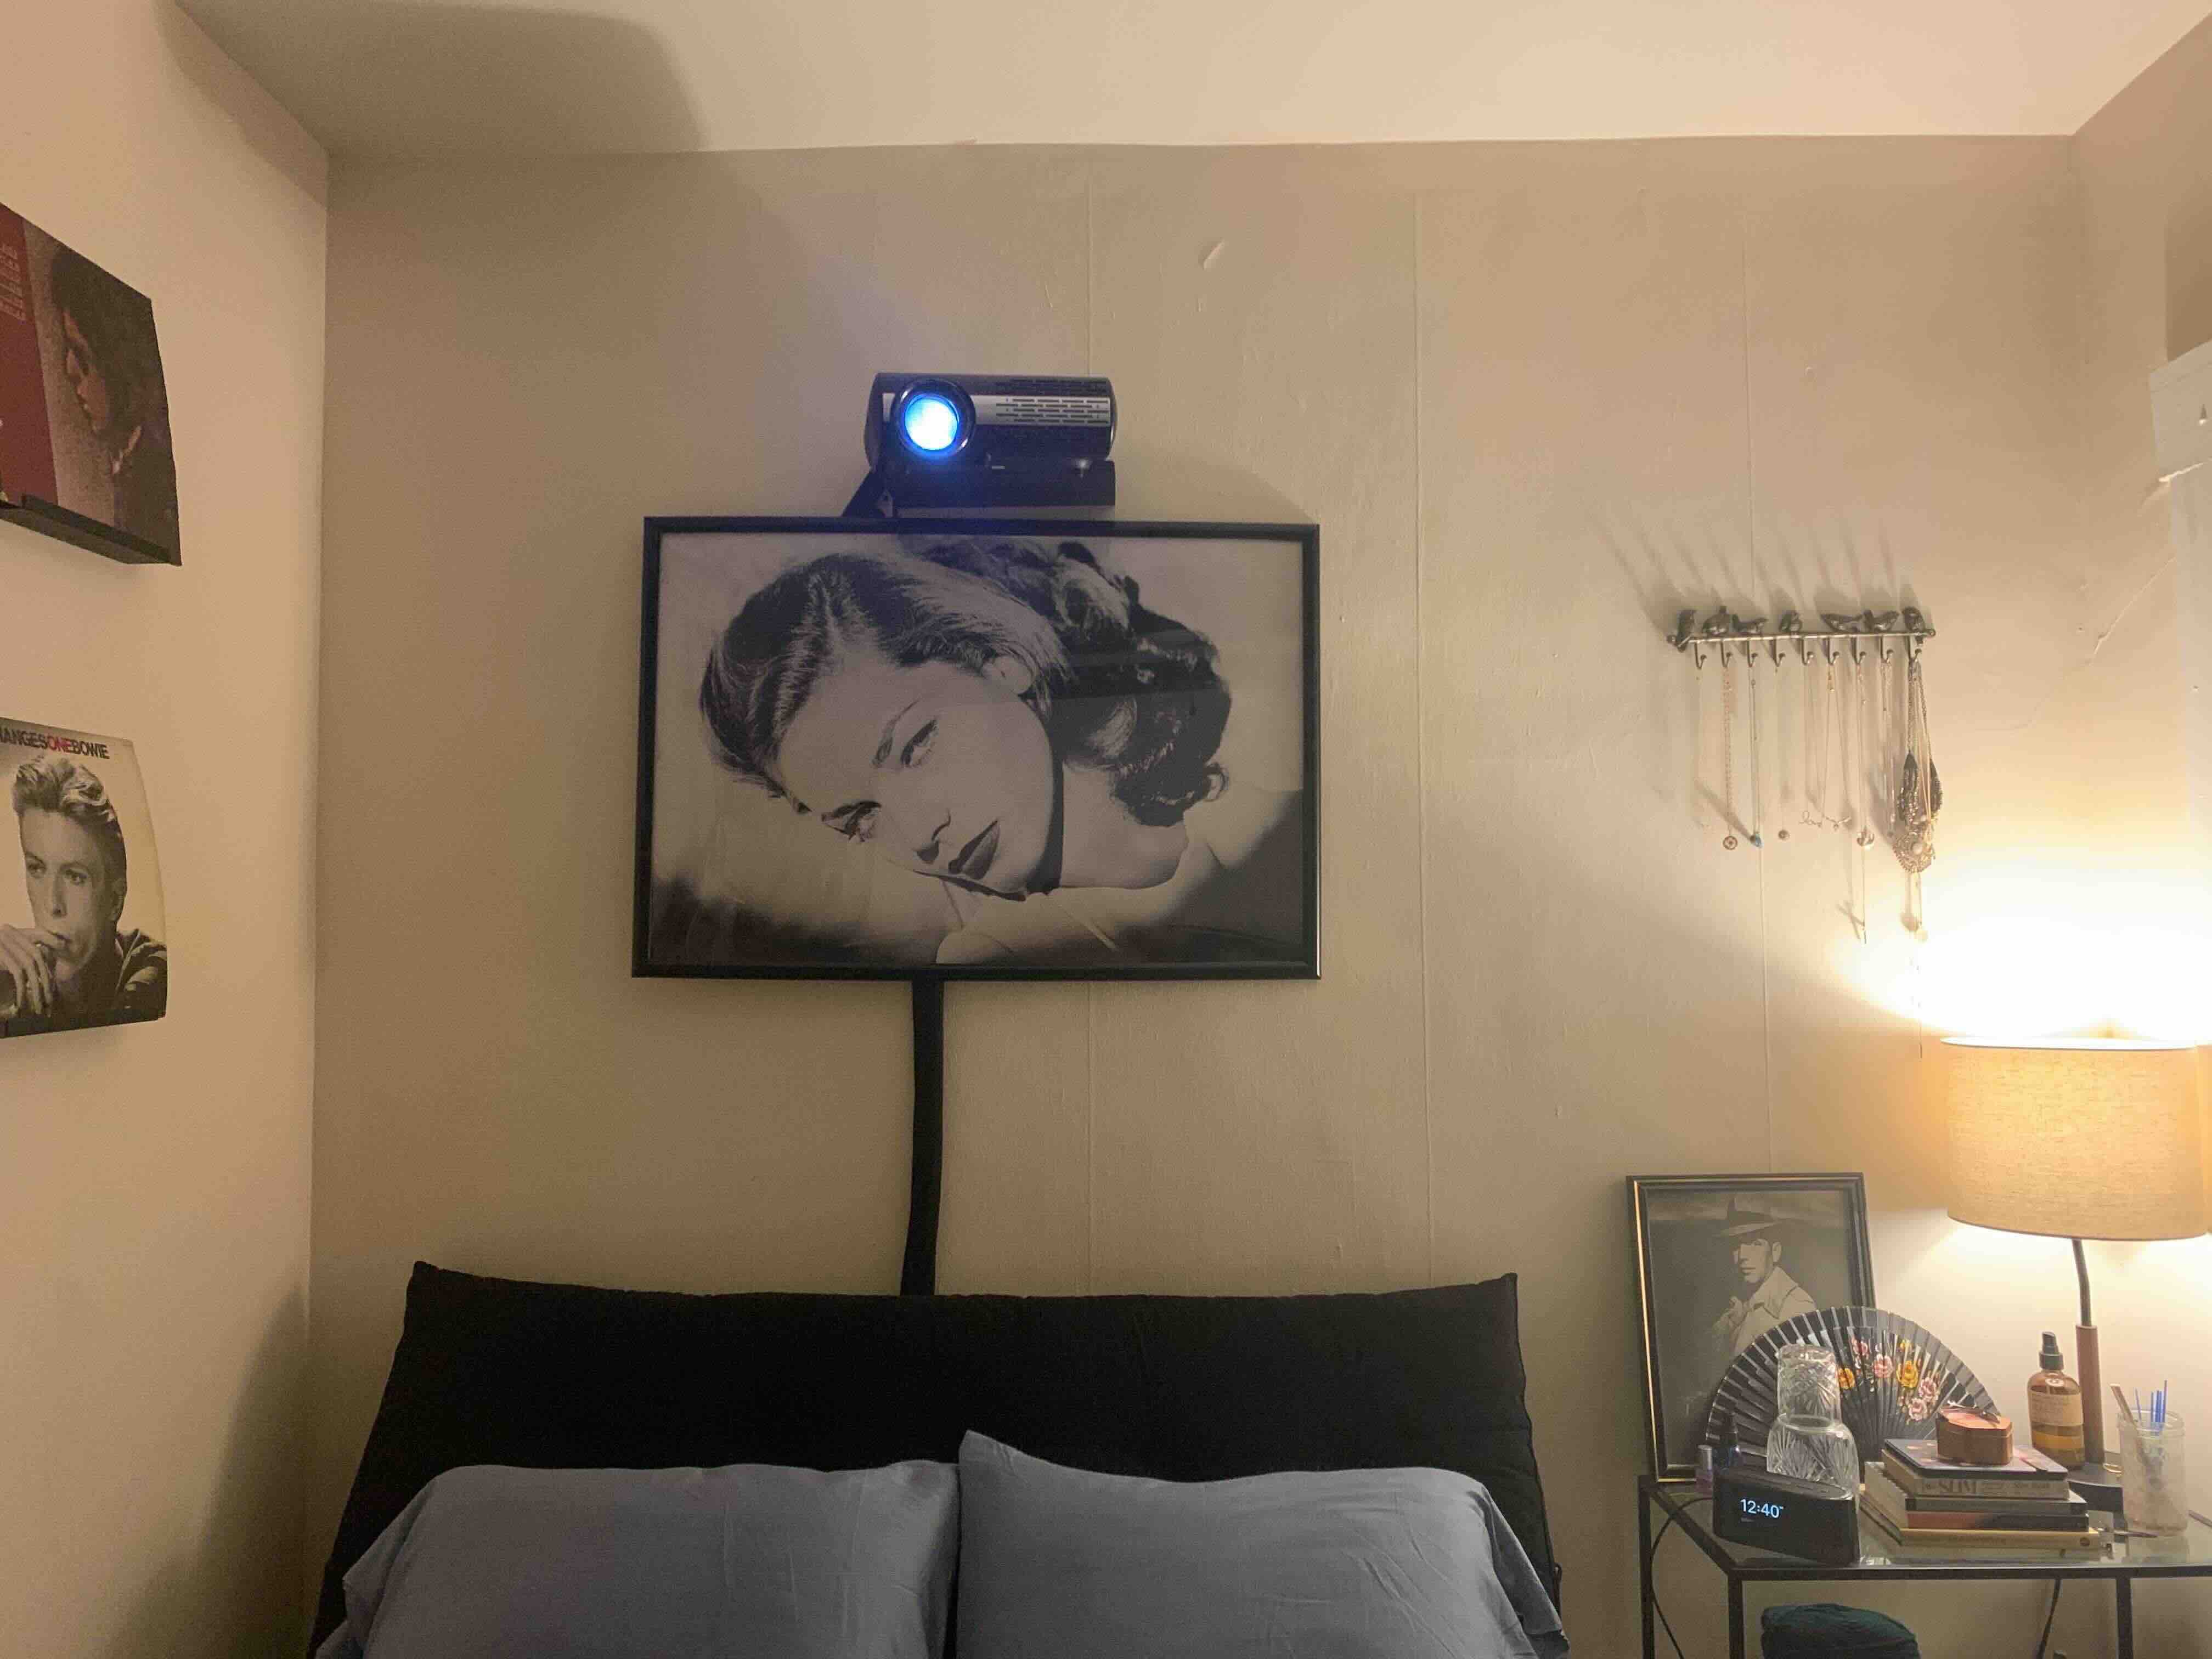 How To Set Up A Projector In The Bedroom